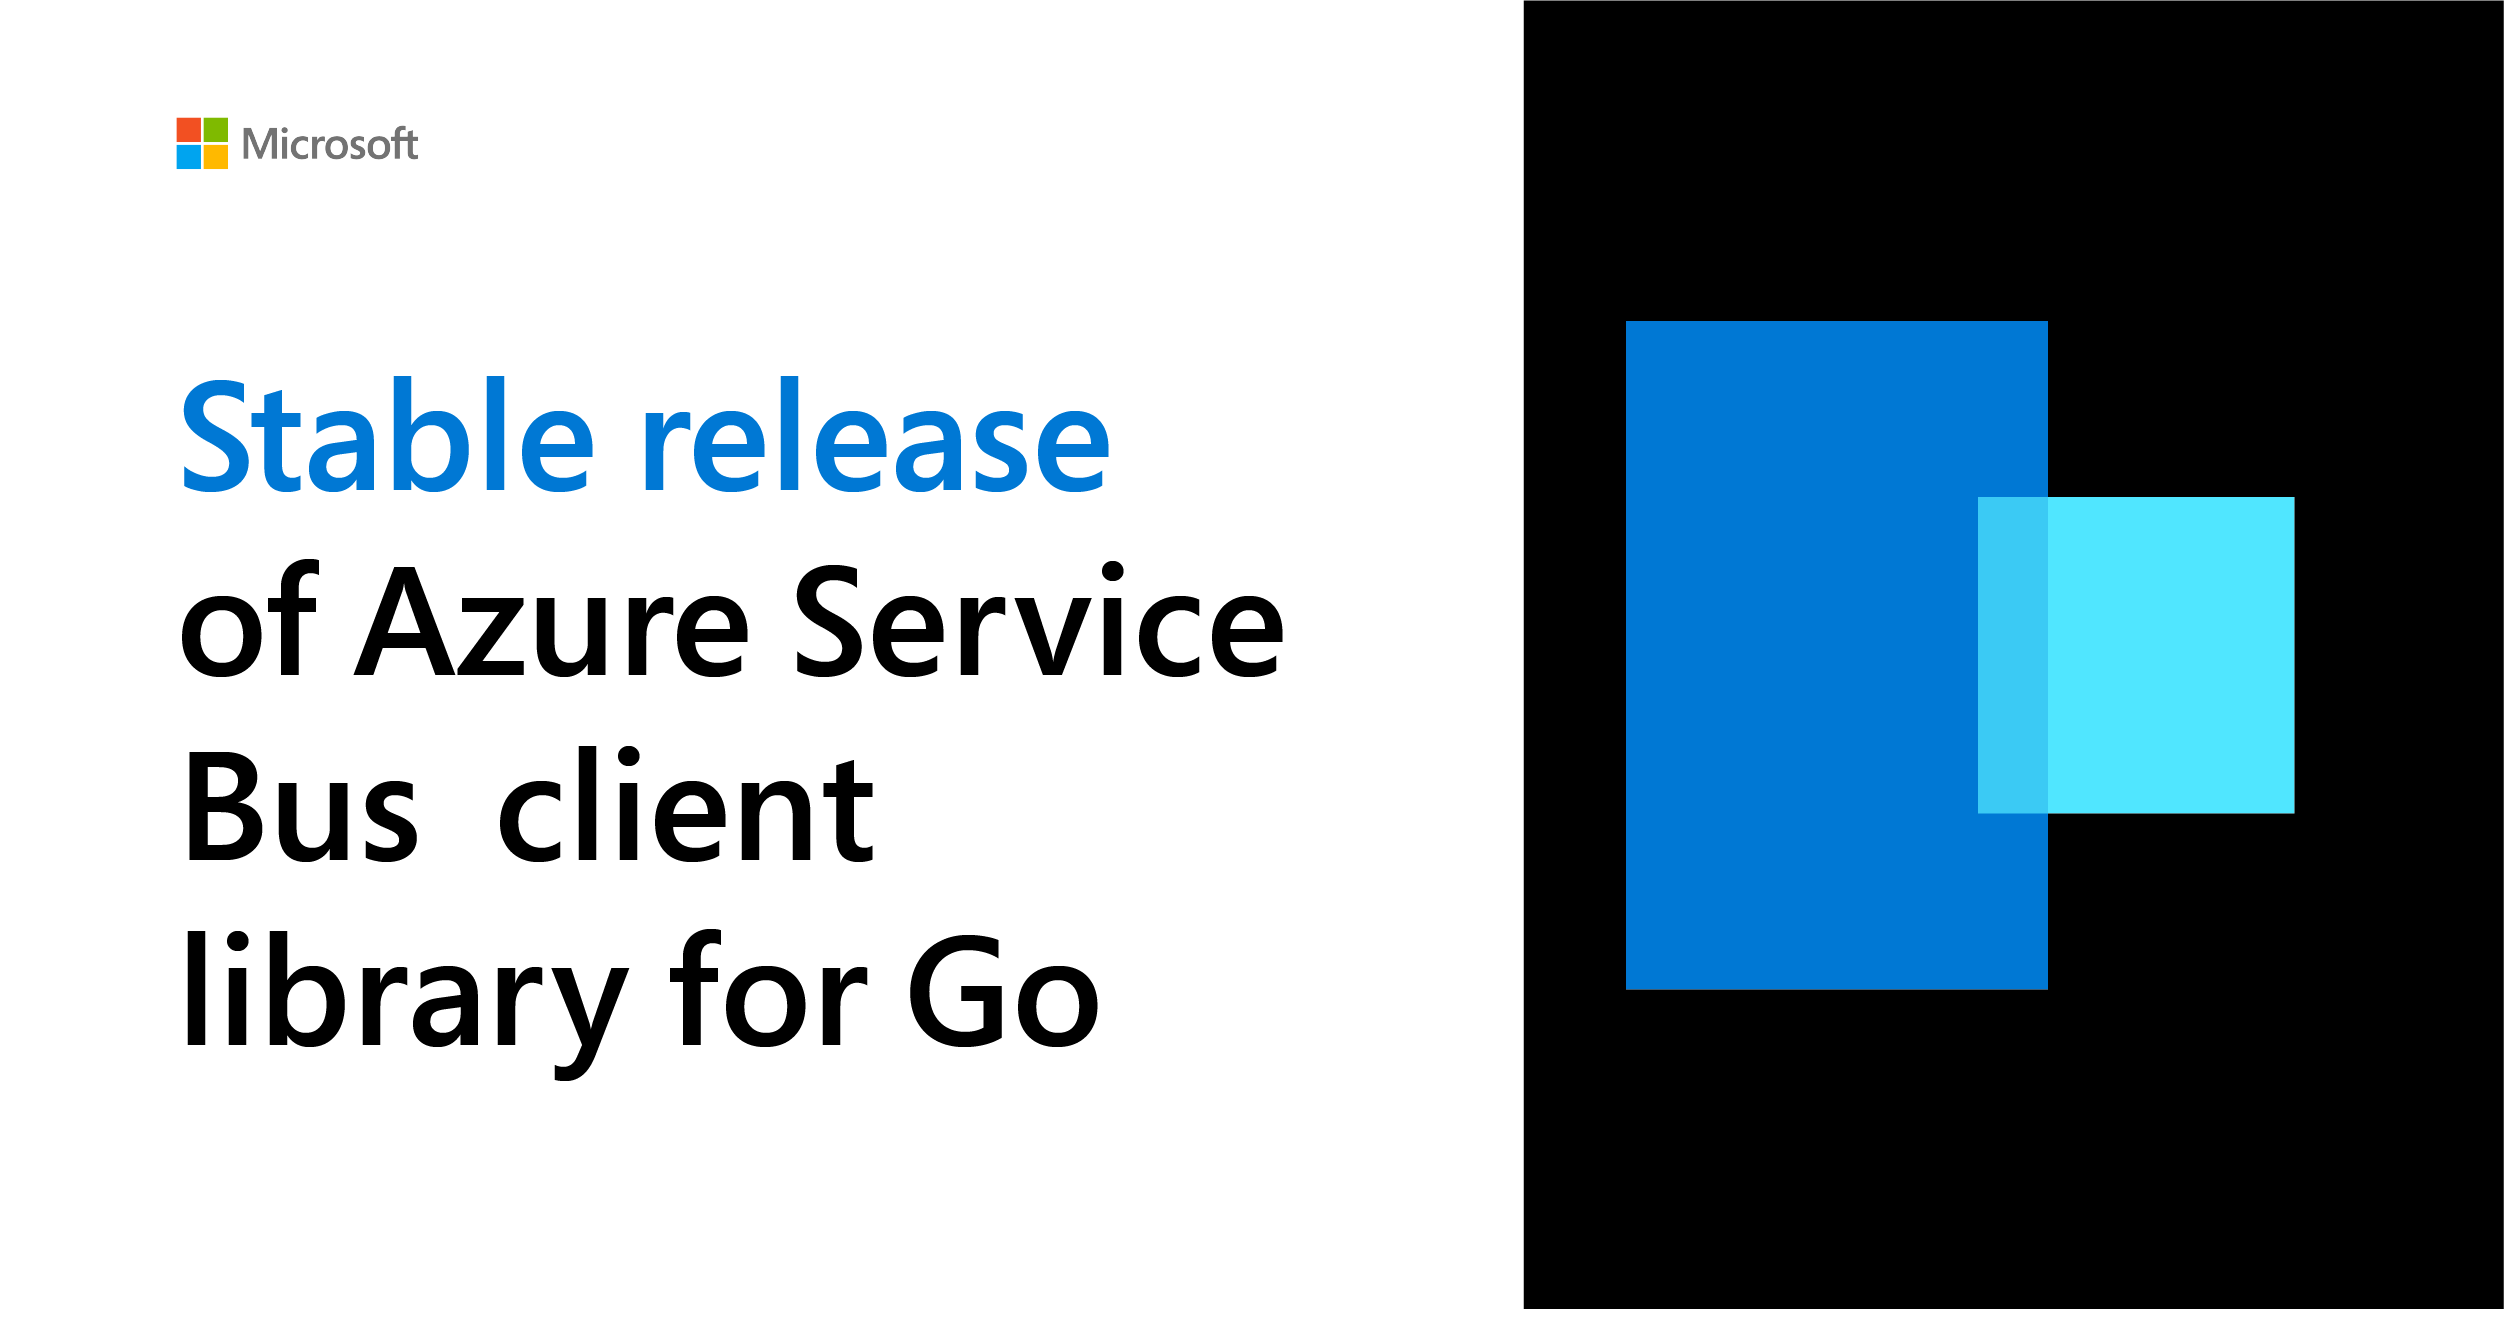 Announcing the stable release of the Azure Service Bus client library for Go